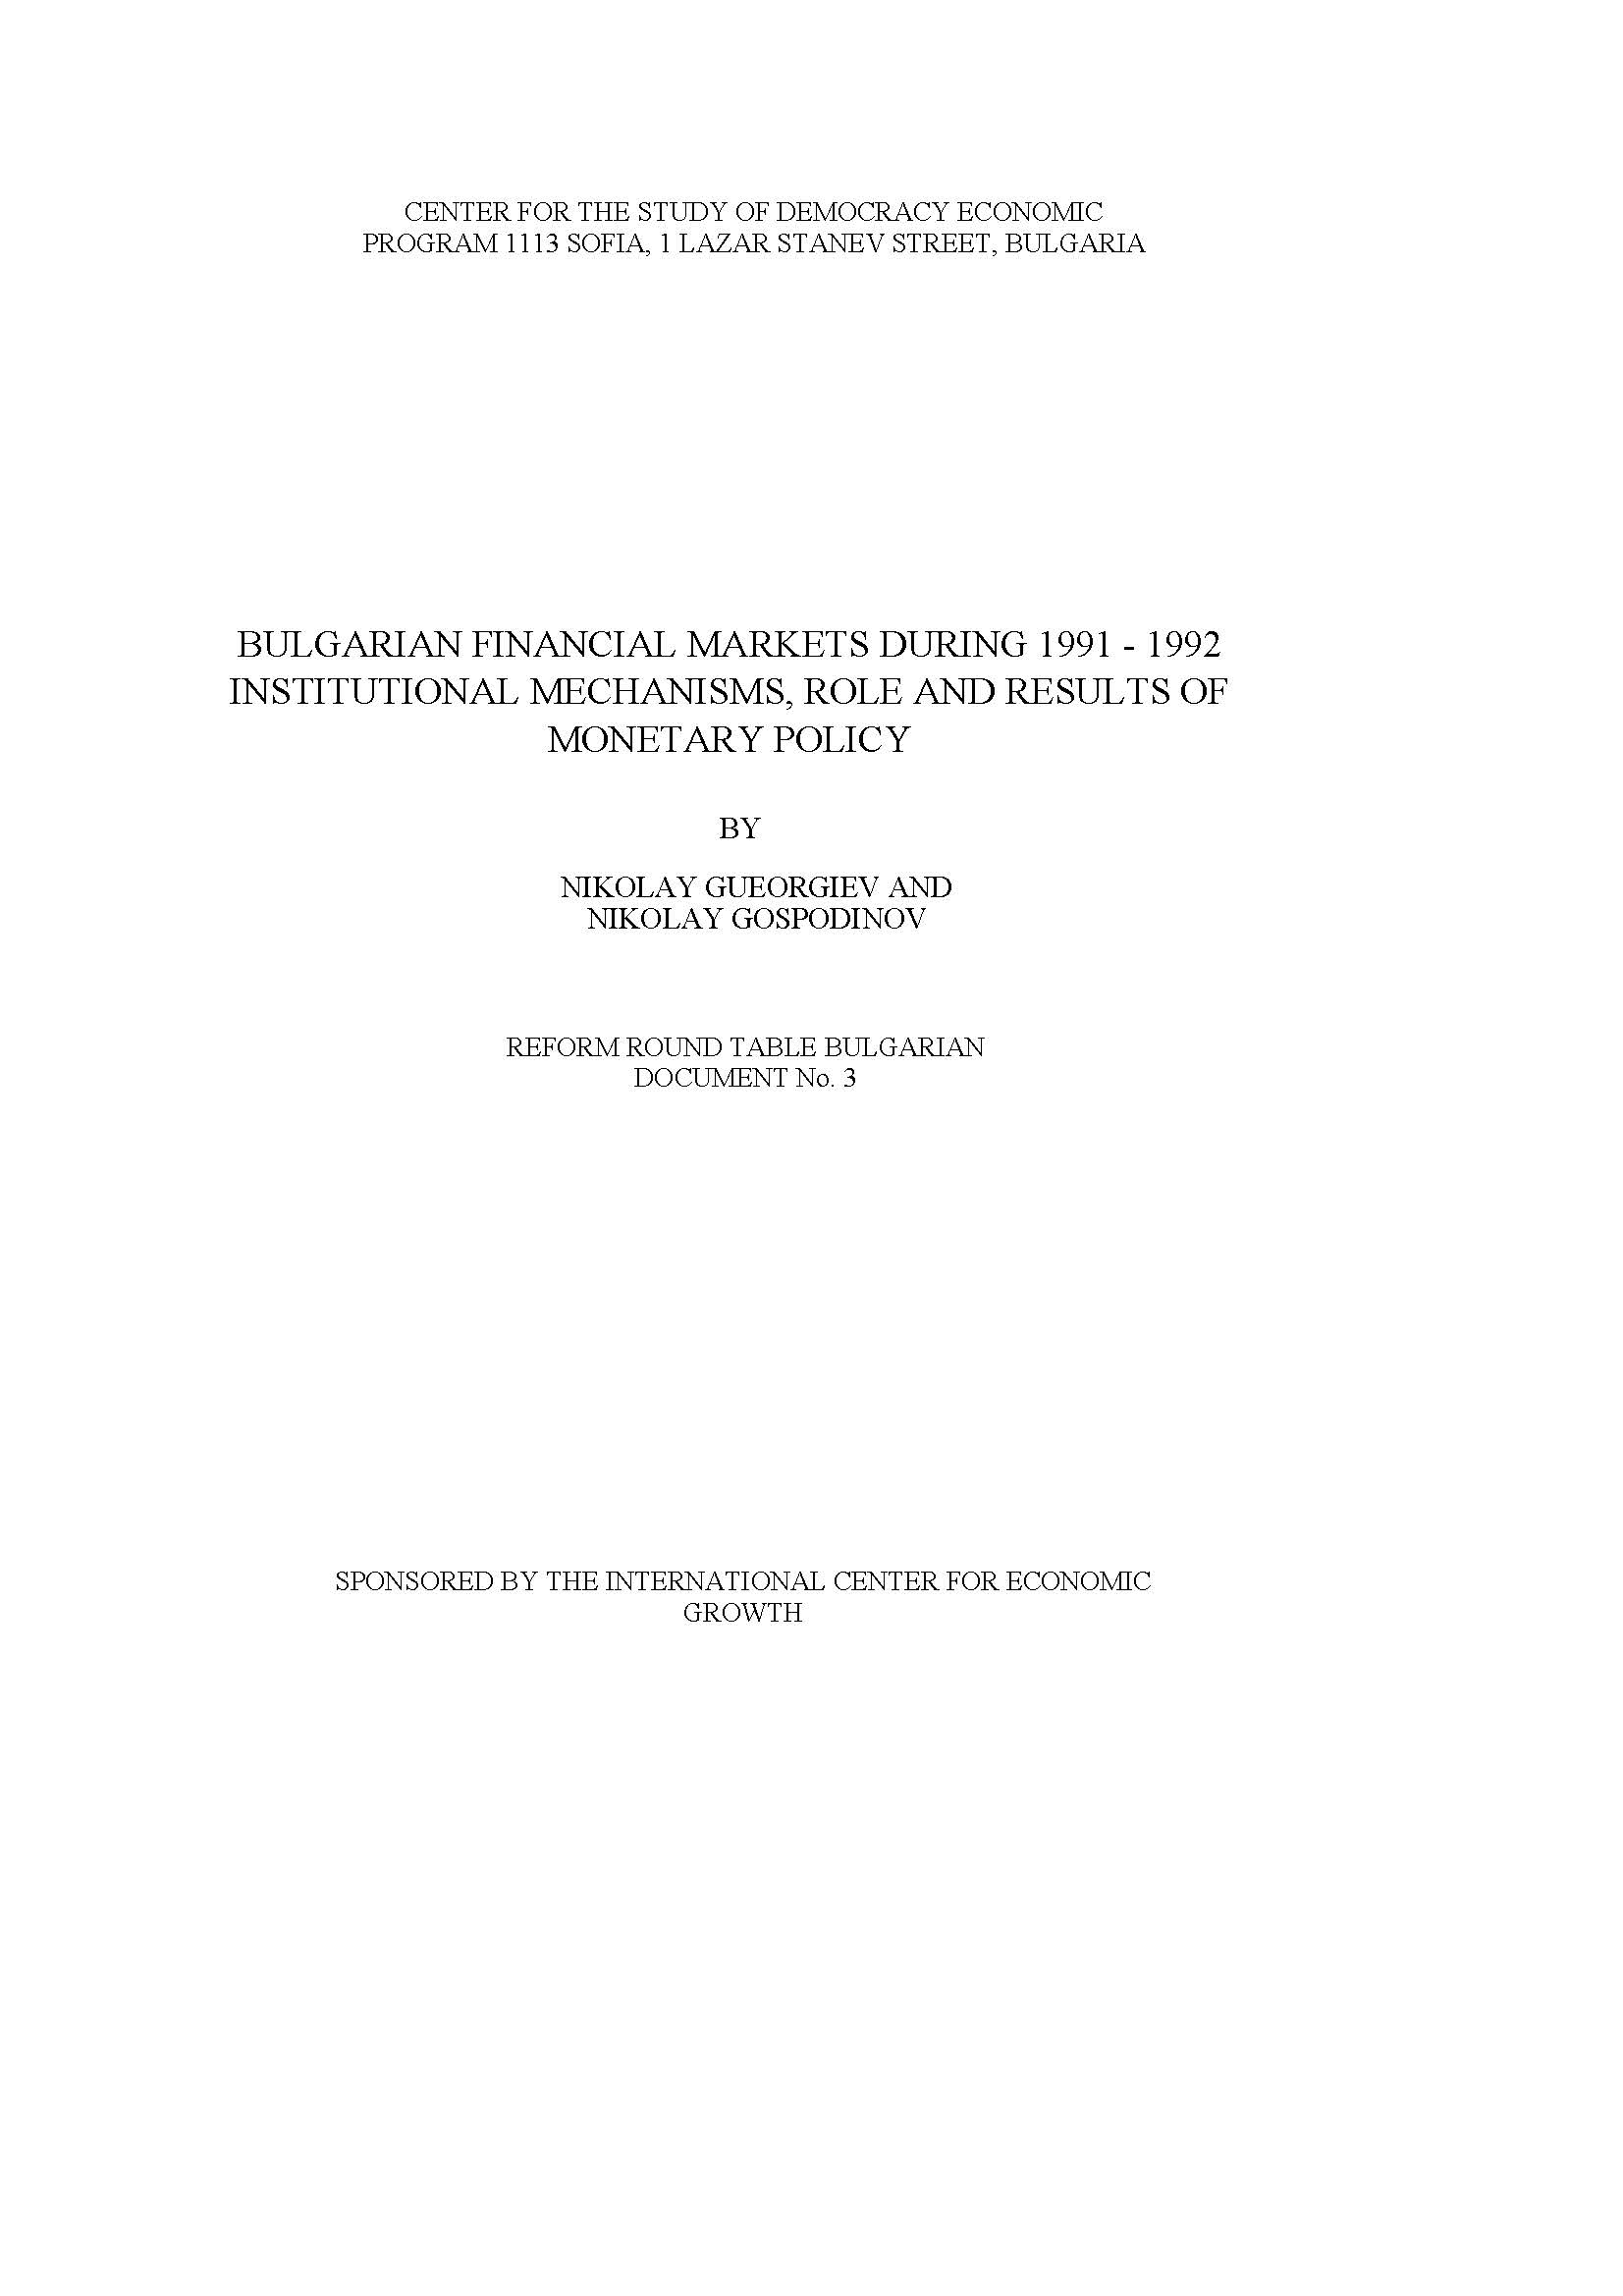 Bulgarian financial markets during 1991 - 1992. Institutional mechanisms, role and results of monetary policy Cover Image